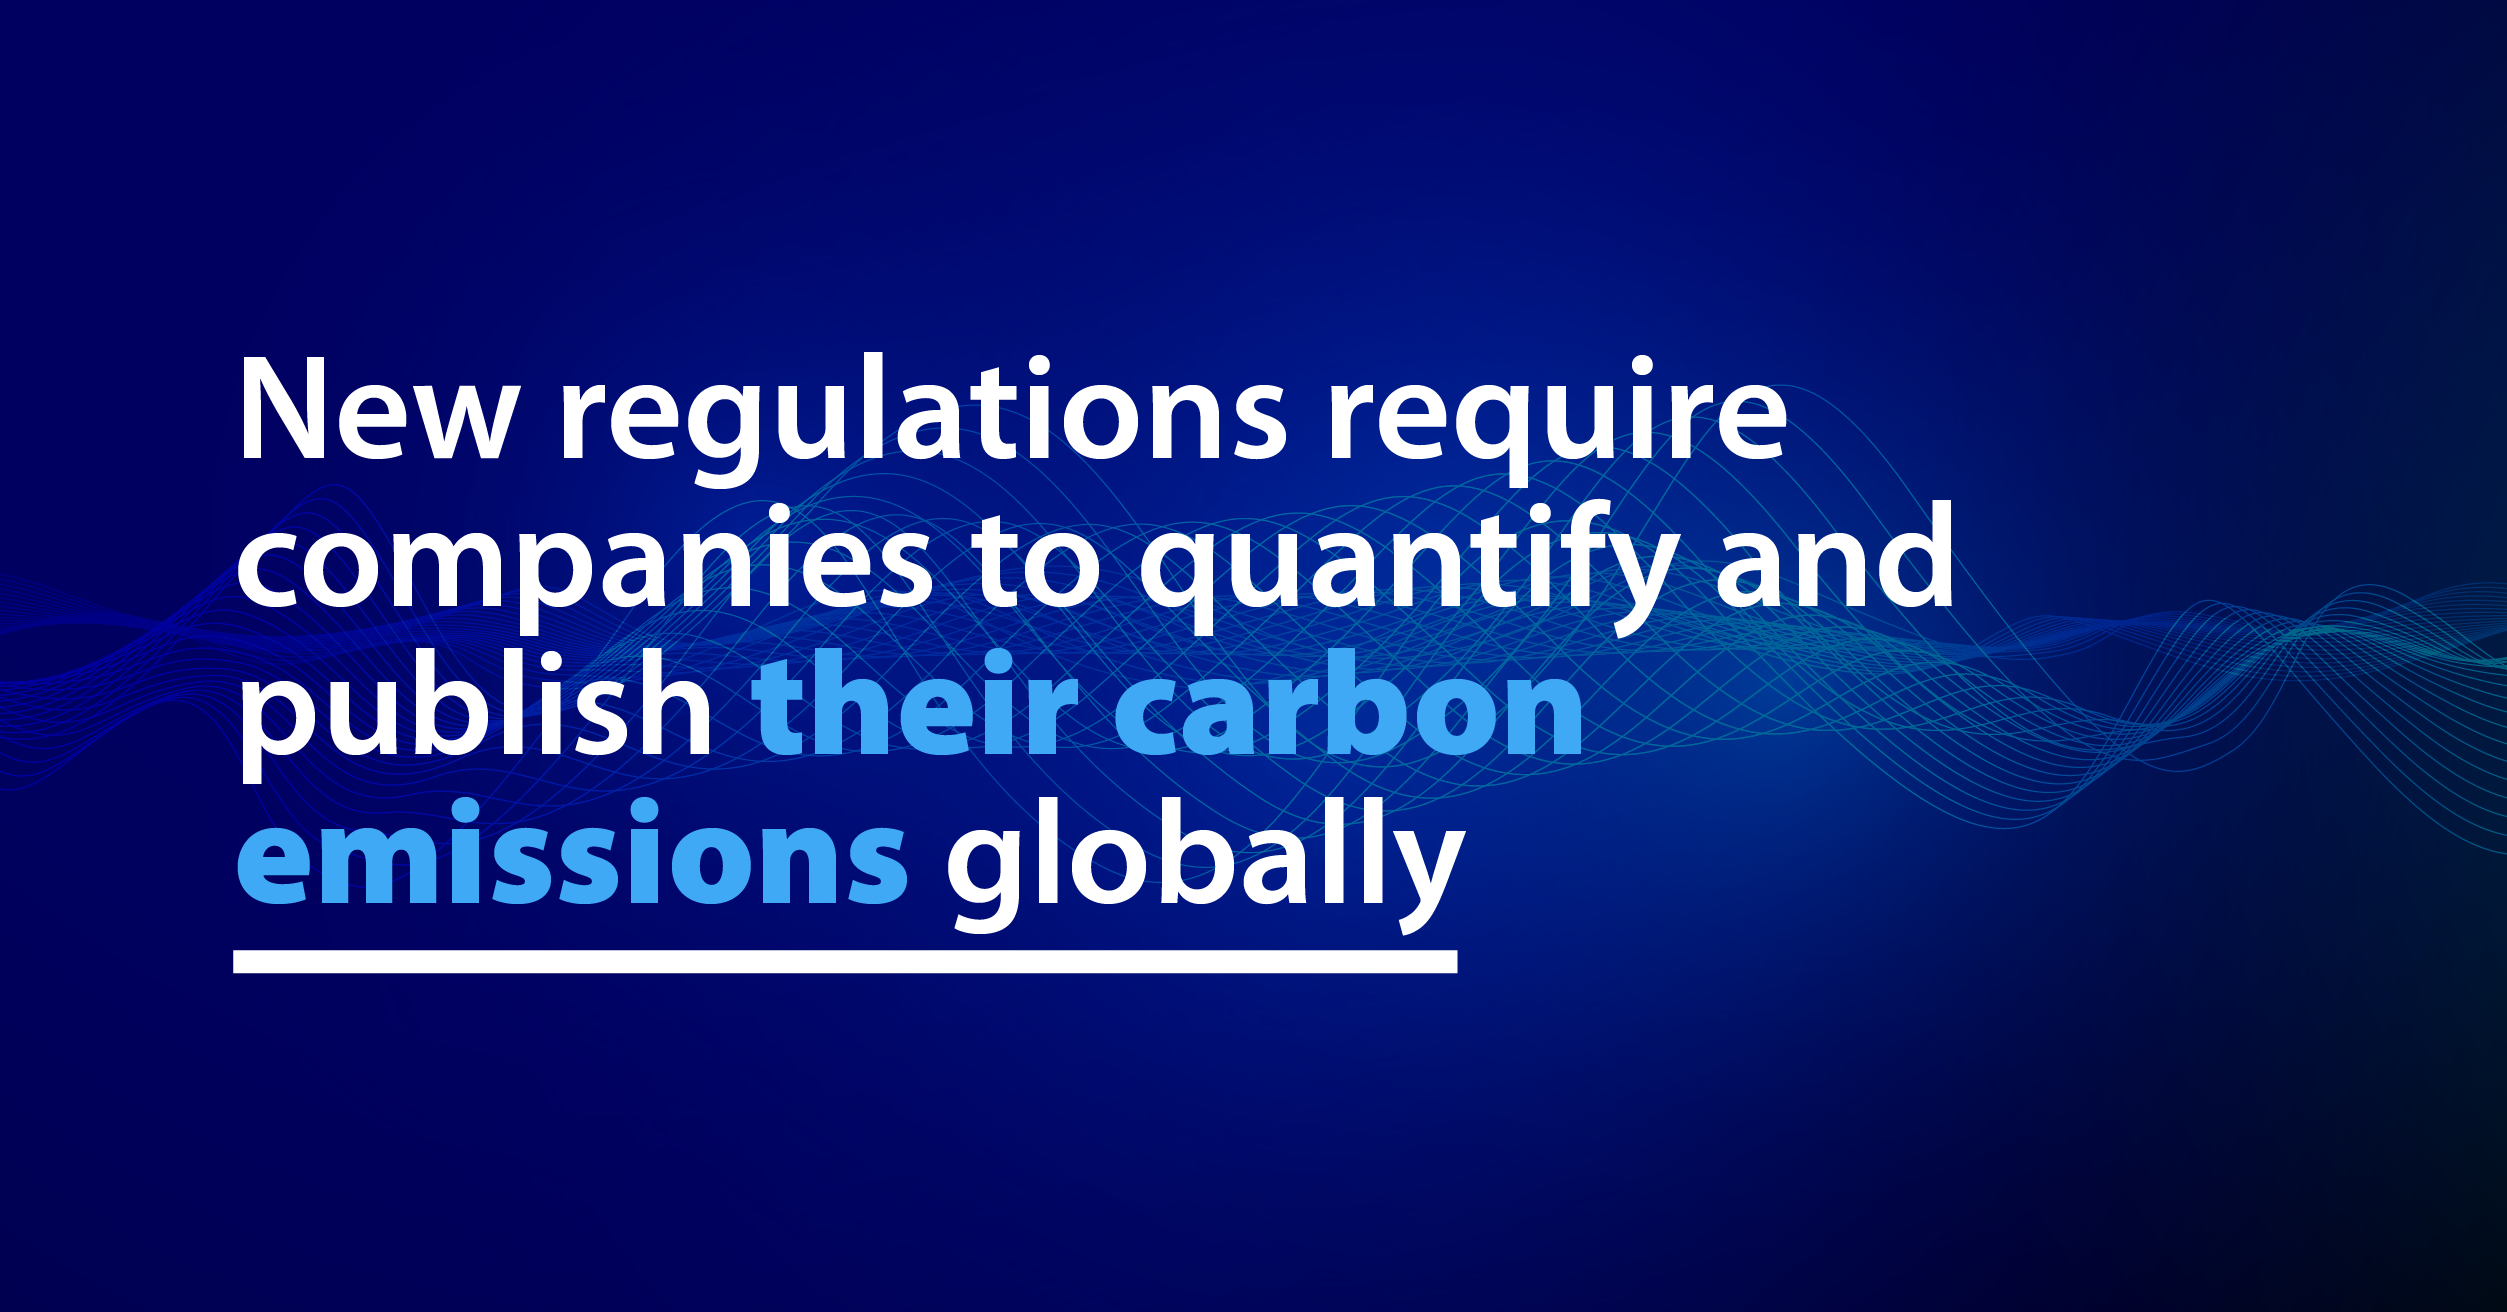 New regulations require companies to quantify and publish their carbon emissions globally